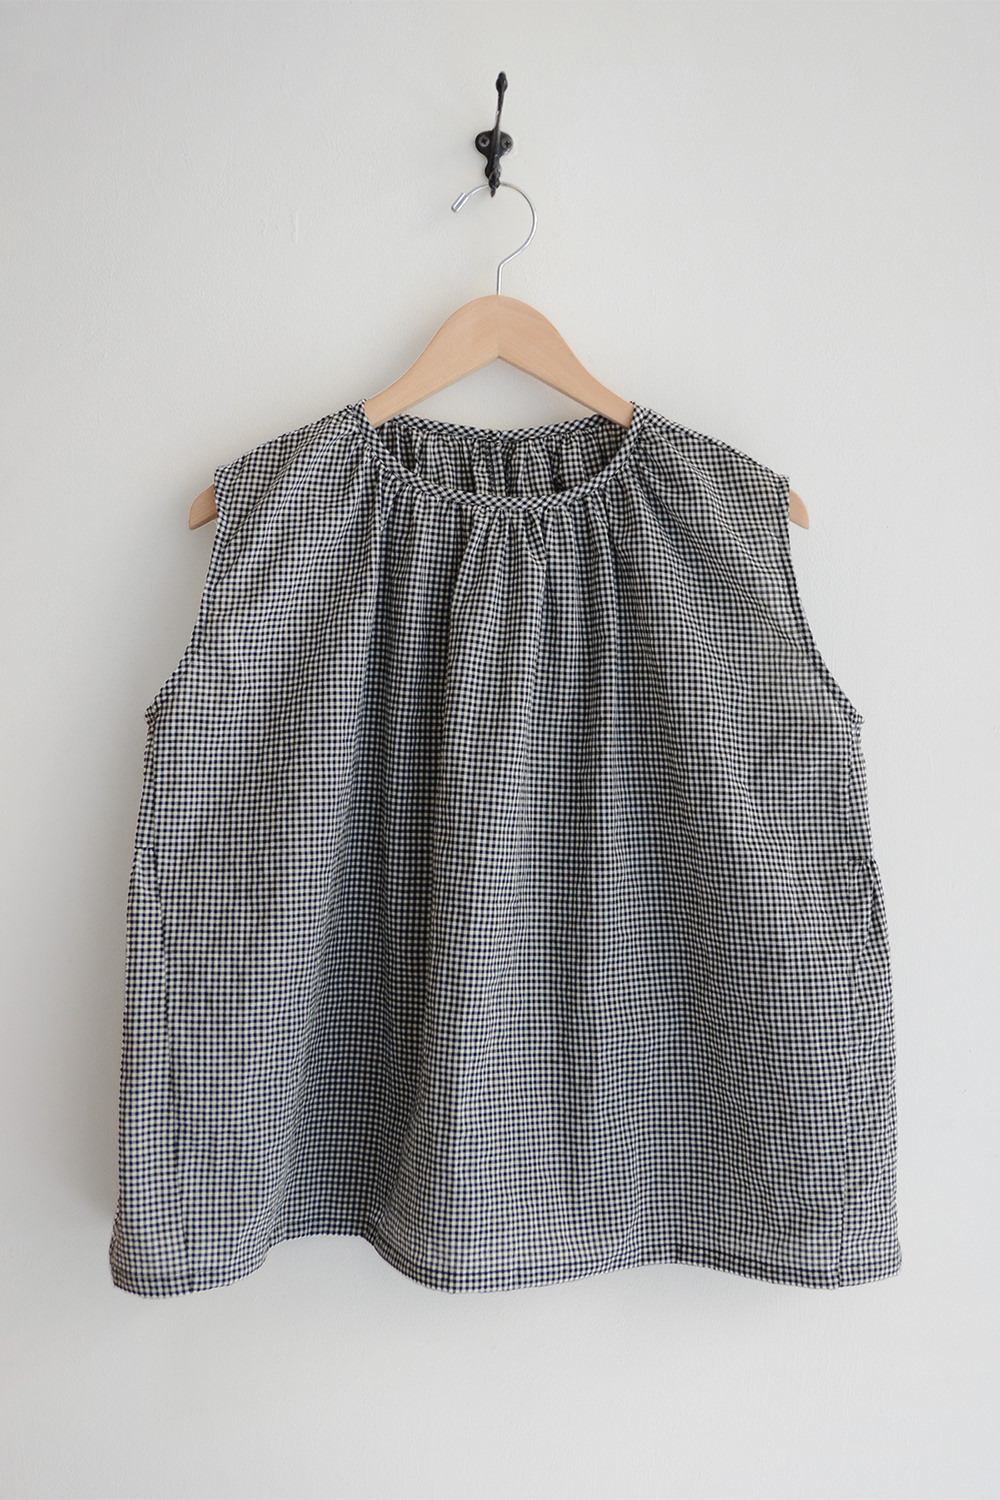 makie cotton camisole black gingham check top picture